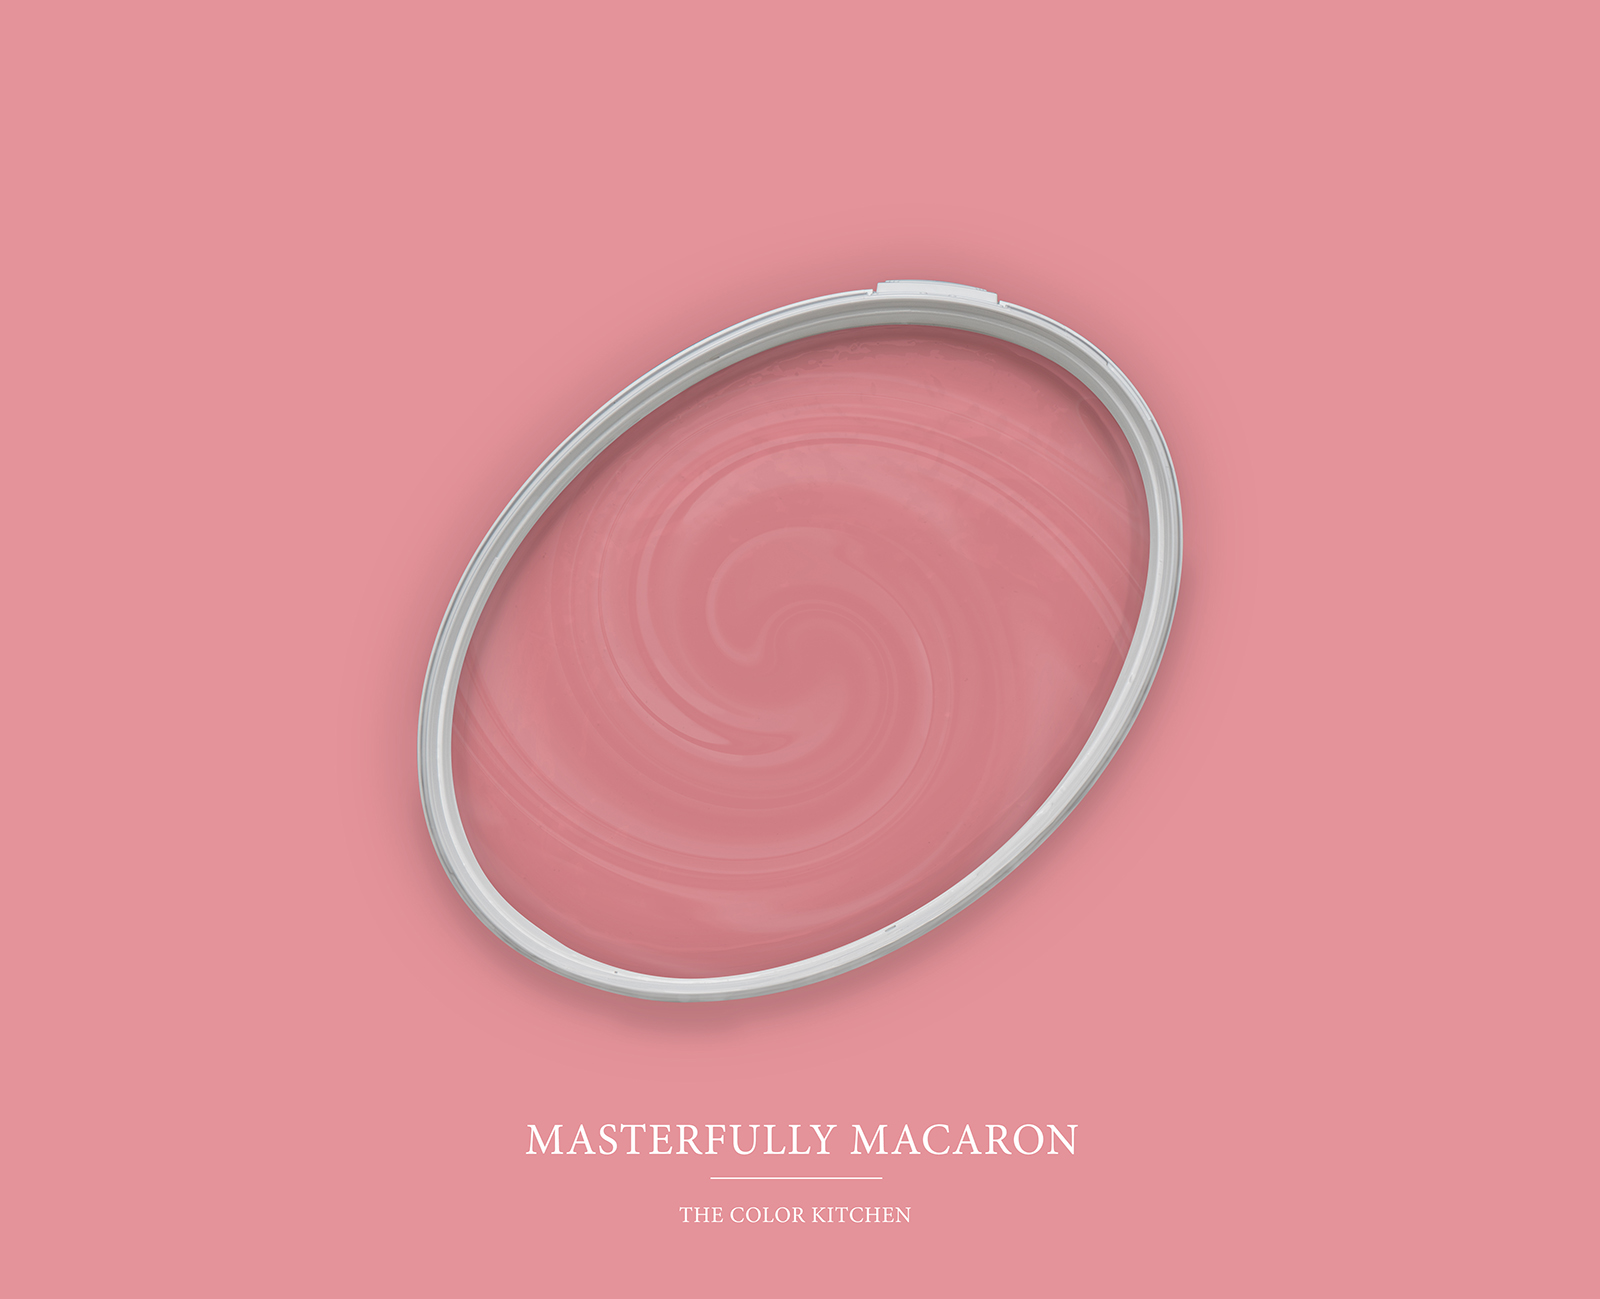 Wall Paint TCK7010 »Masterfully Macaron« in vivid pink – 5.0 litre
